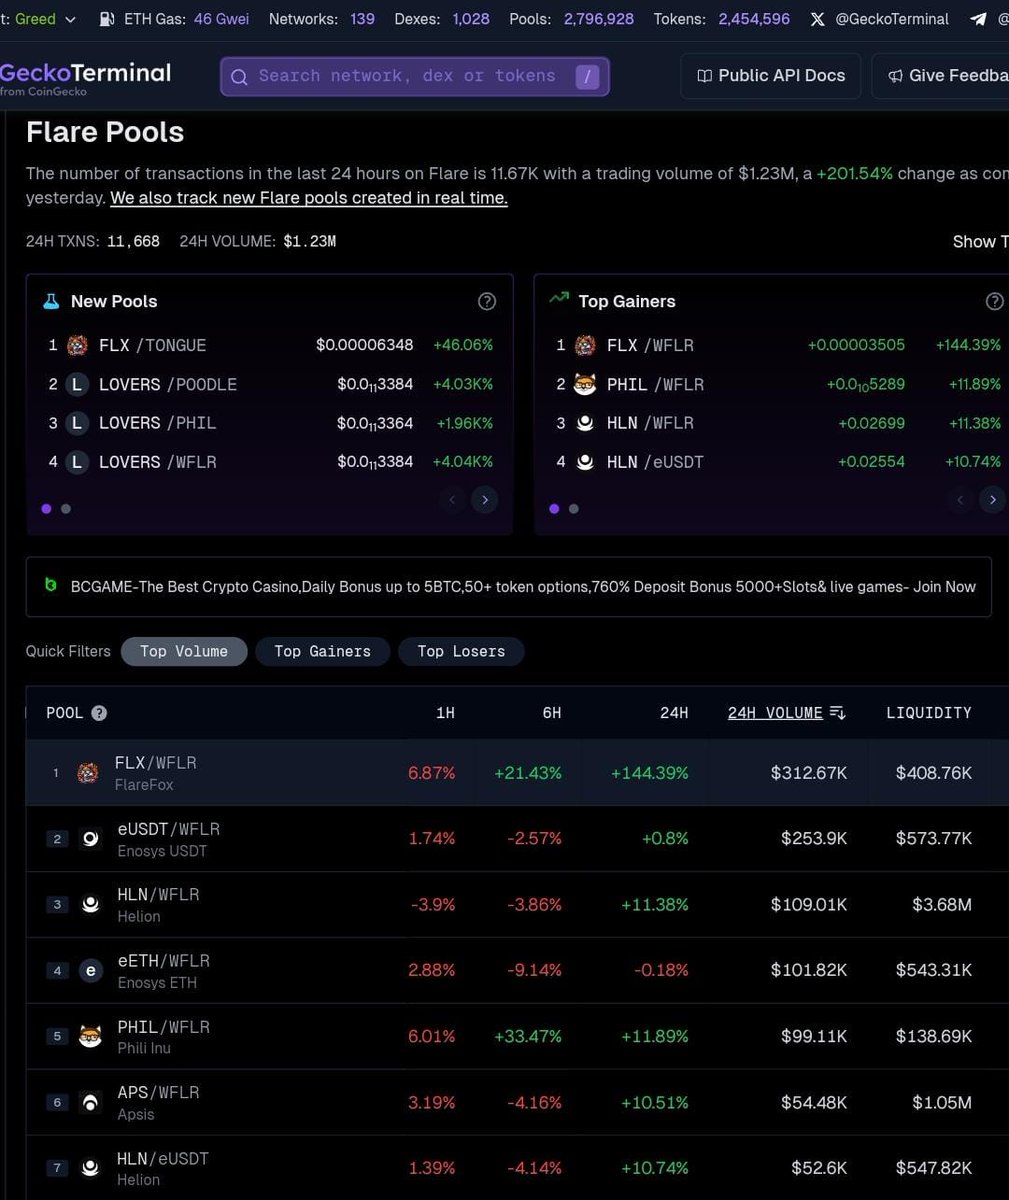 FlareFox is not just leading in trading volume on Flare Network over the past 24 hours; it's also emerged as the top gainer during this time. Huge gratitude to the supportive Flare community for making this possible! 🦊📈 #FlareFox #TopGainer #FlareNetwork #FLR #FLX